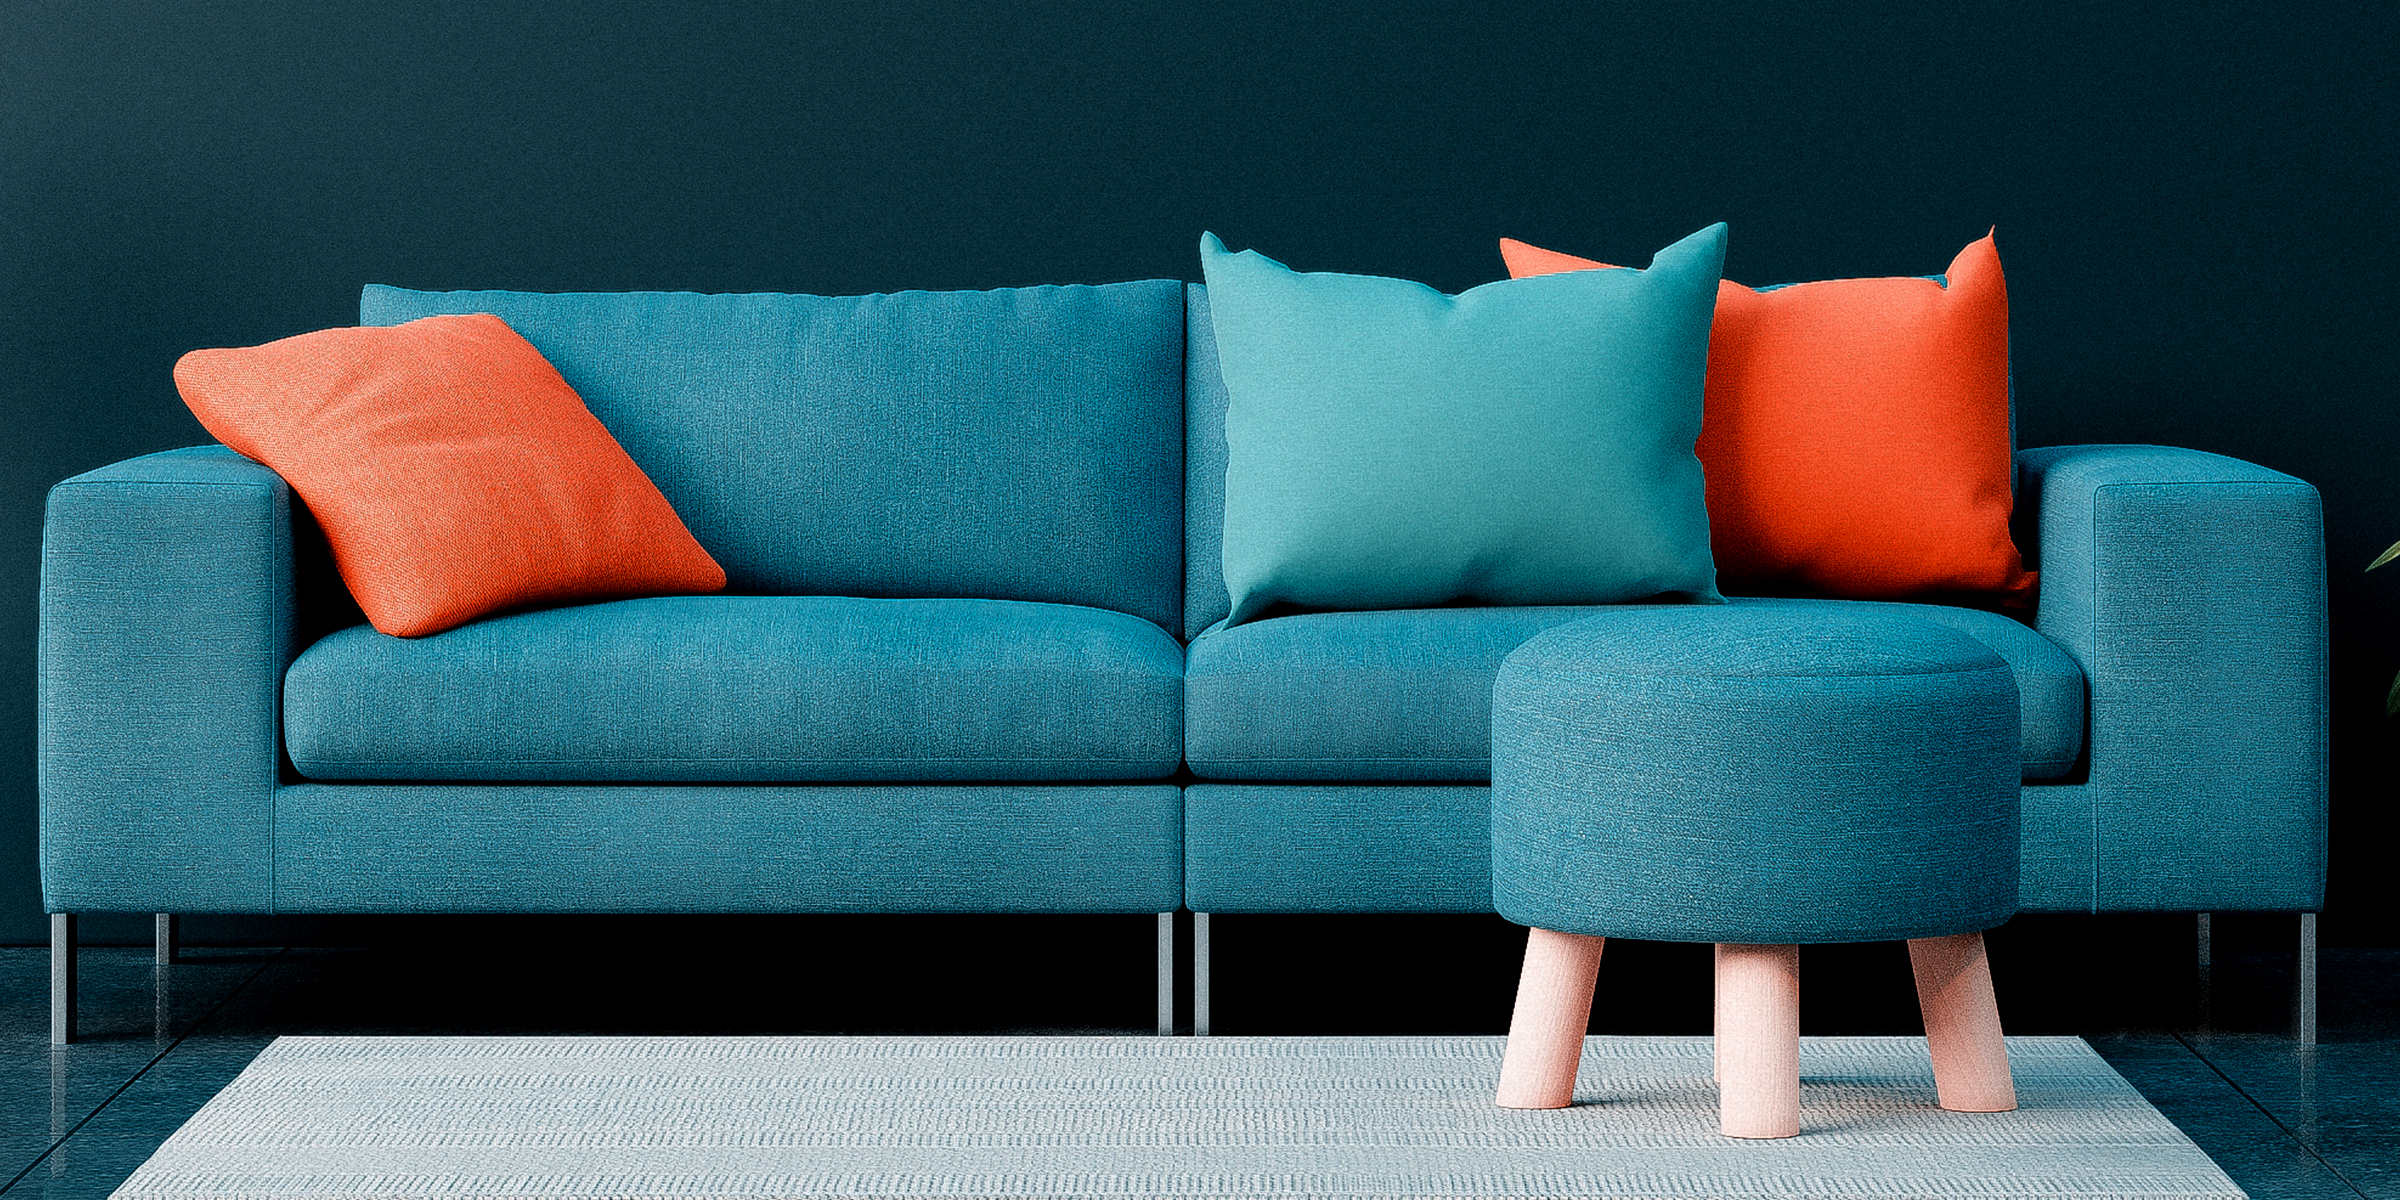 A turqouise blue couch | Source: Shutterstock